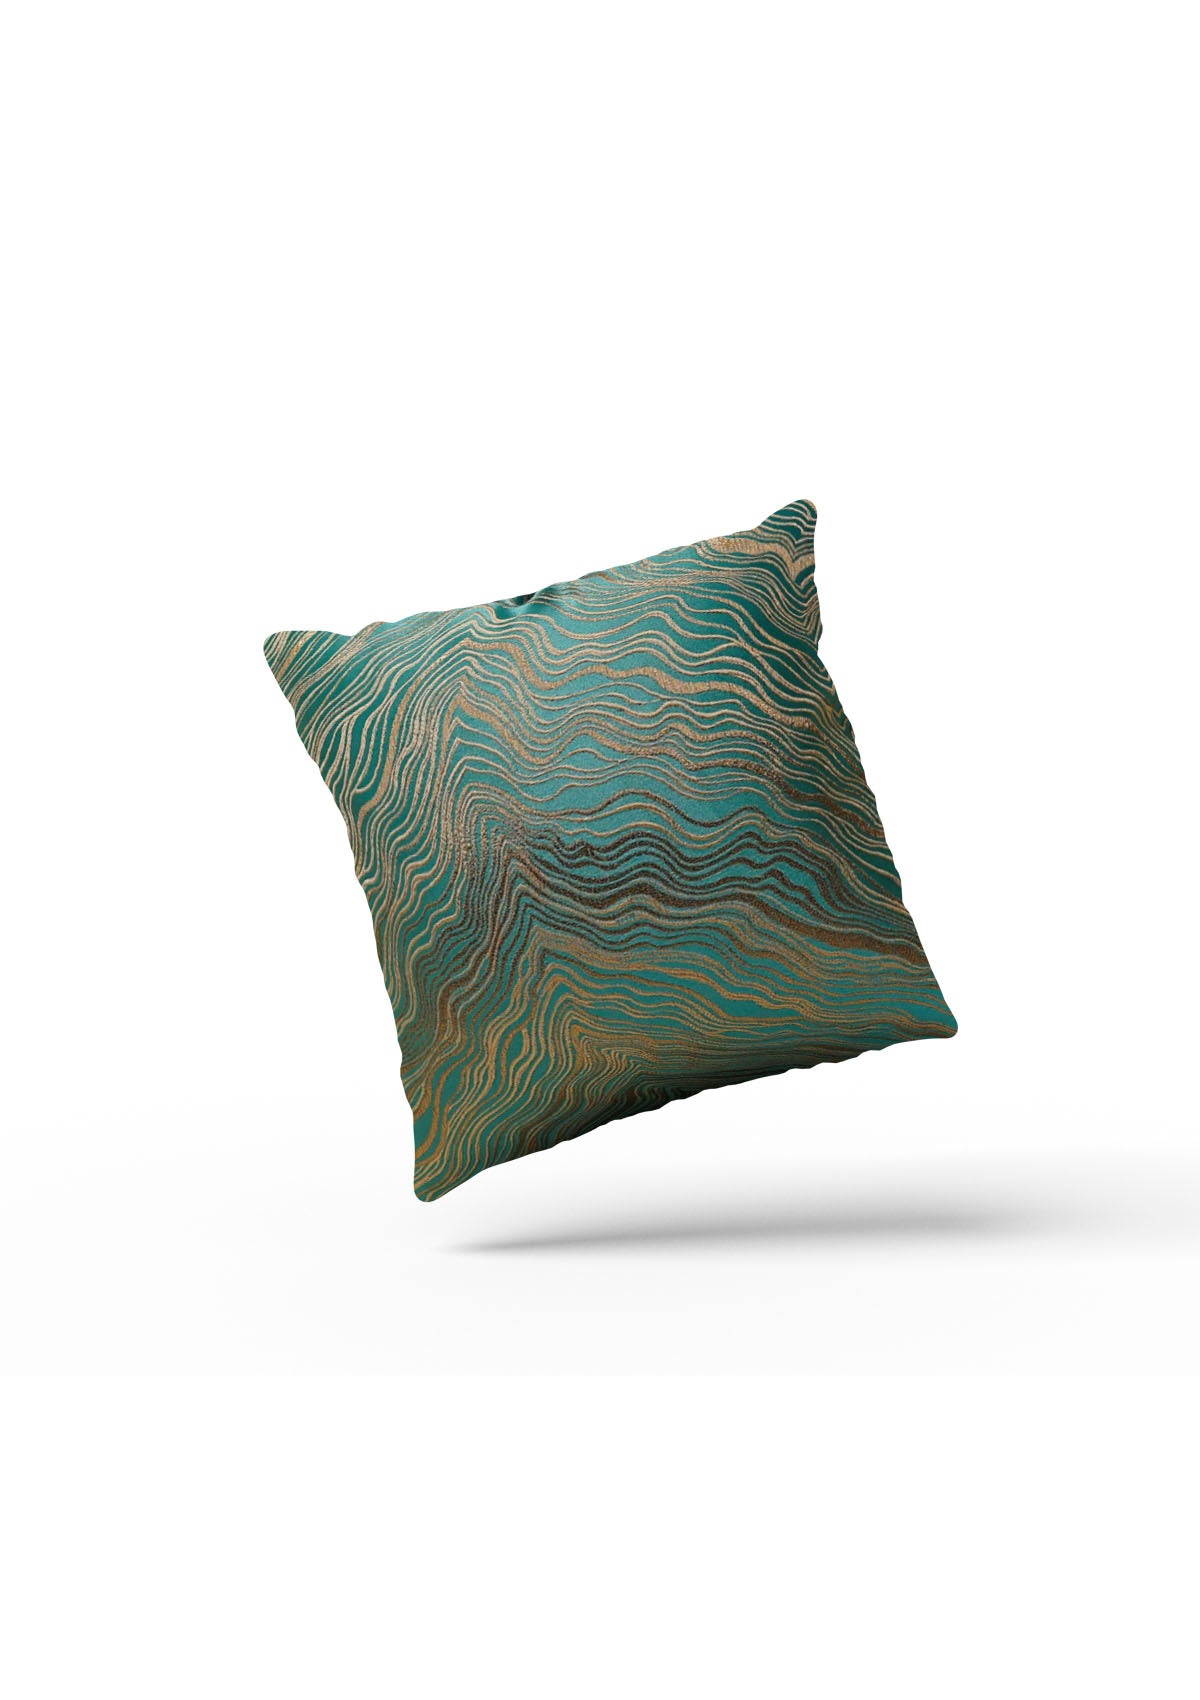 Luxurious emerald green and gold cushion cover with textured fabric